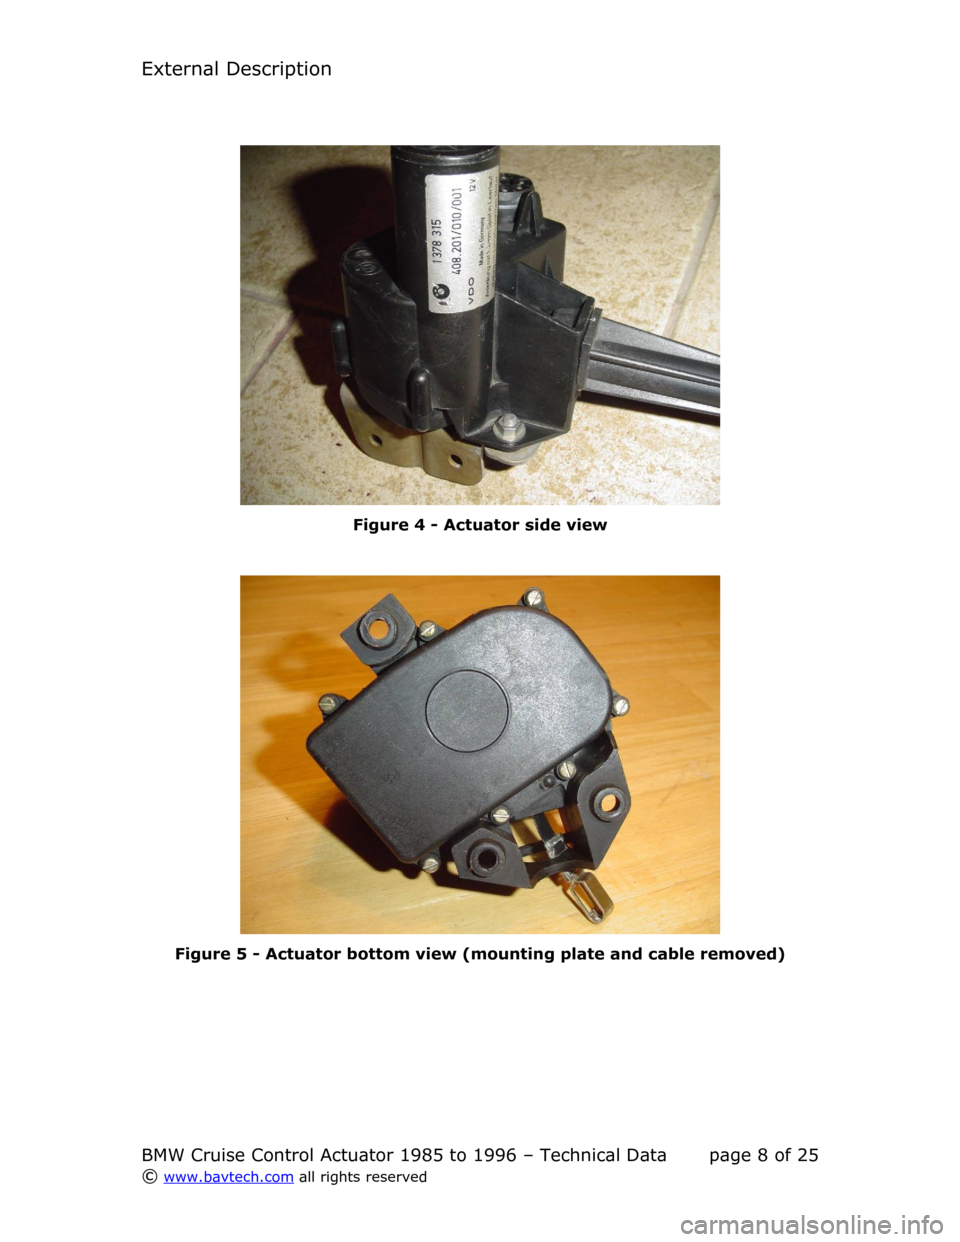 BMW 8 SERIES 1995 E31 Cruise Control Acutator External Description
Figure  4  - Actuator side view
Figure  5  - Actuator bottom view (mounting plate and cable removed)
BMW Cruise Control Actuator 1985 to 1996 – Technical Data page  8  of  25
©